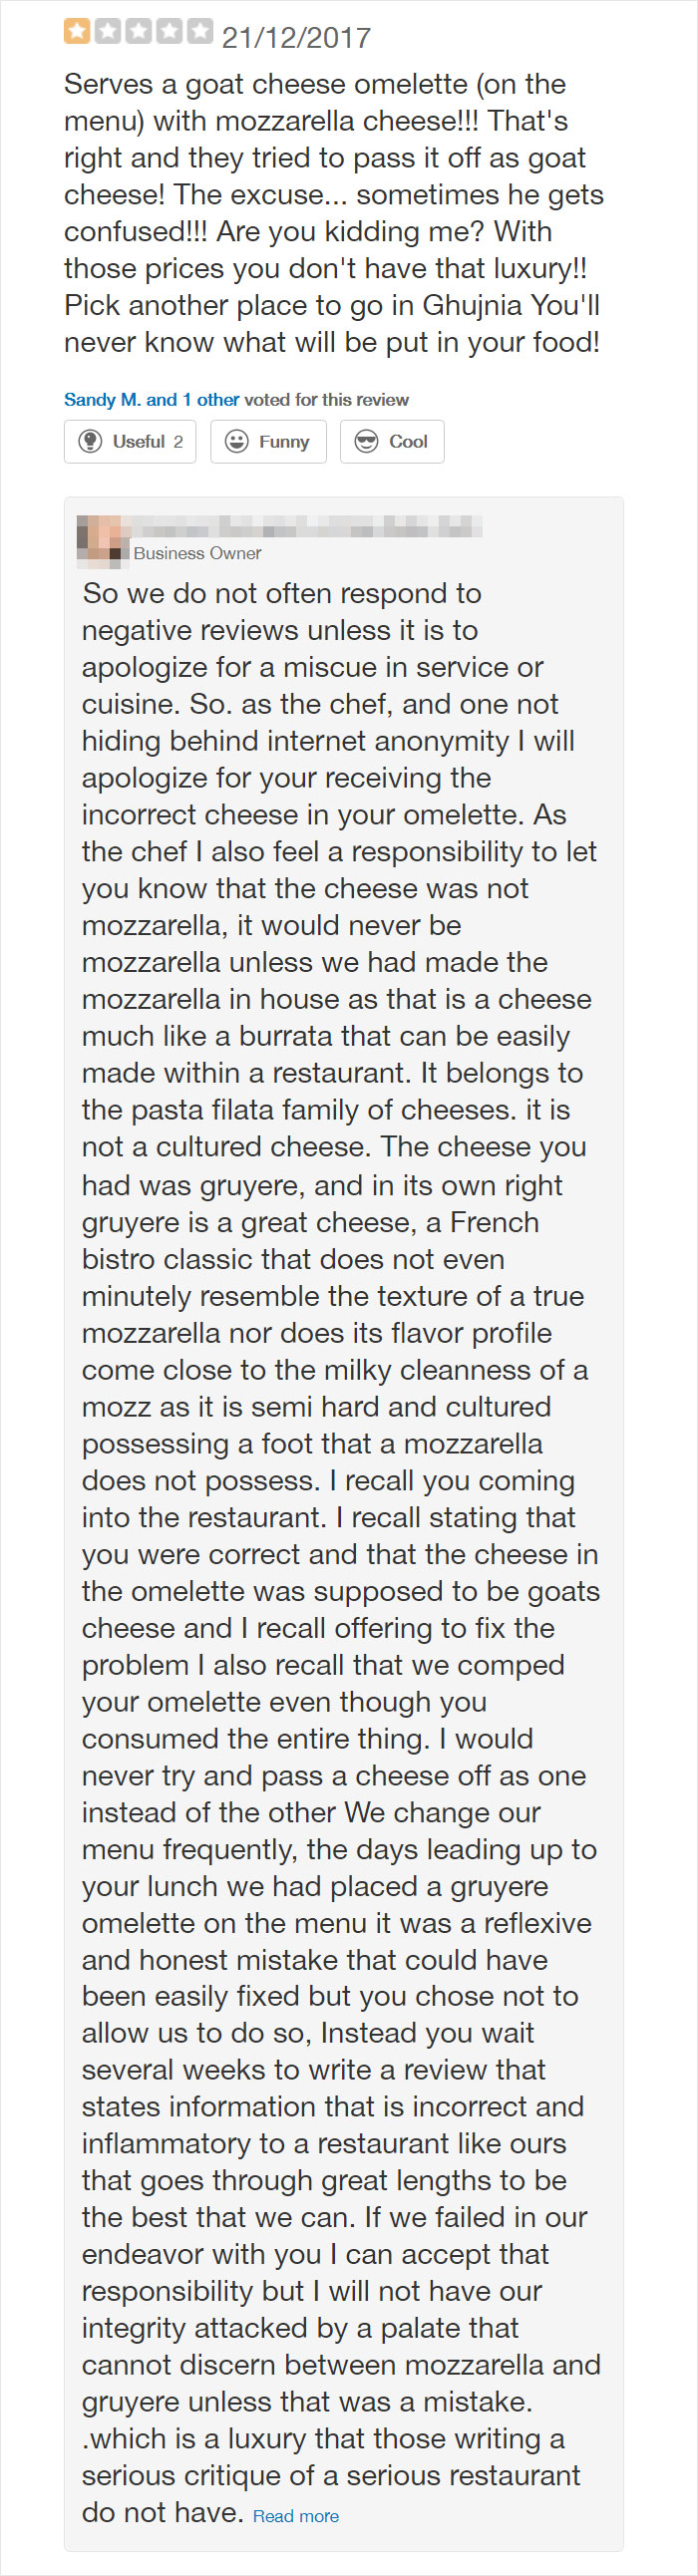 One Of My Favorite Restaurants Got A Bad Review And The Owner/Chef Called Them Out...